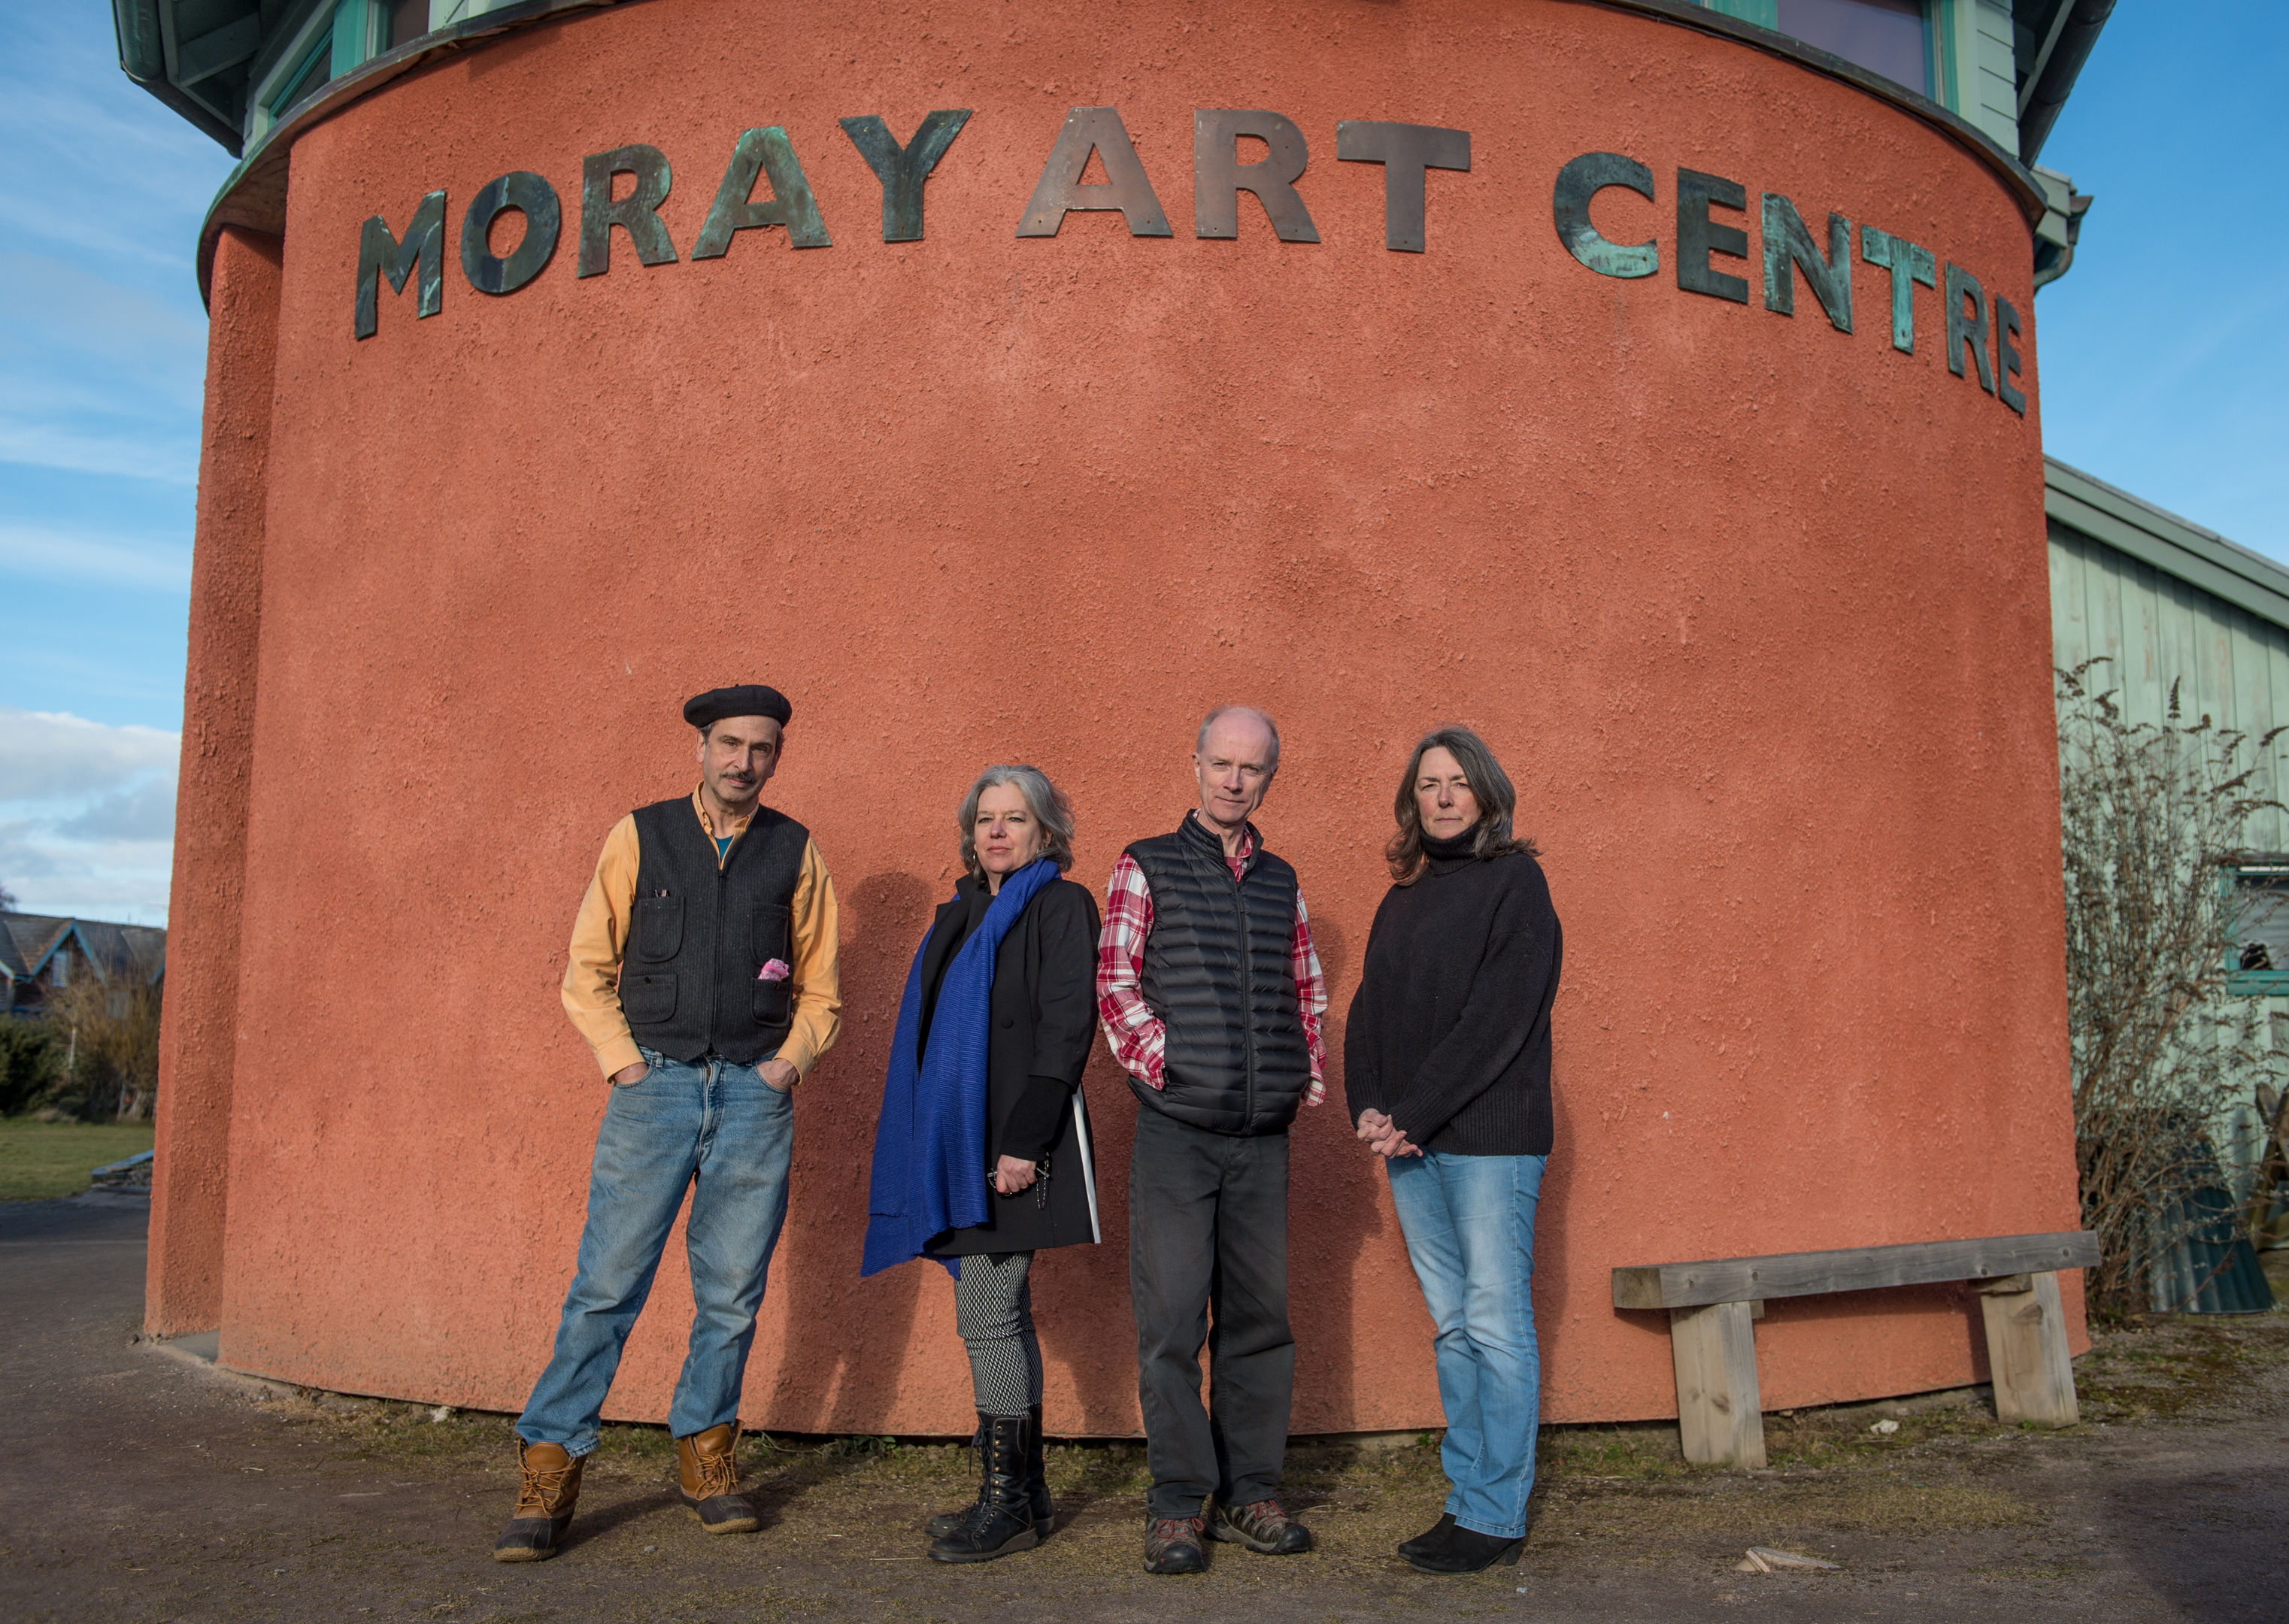 The future is brighter at Moray Art Centre. 
Pictured: Artist, tutor and founder Randy Klinger, artist, tutor and trustee Celia Forestal Smith, Water colour artist Jonathon Wheeler, and artist, trustee and teacher Julia Law.